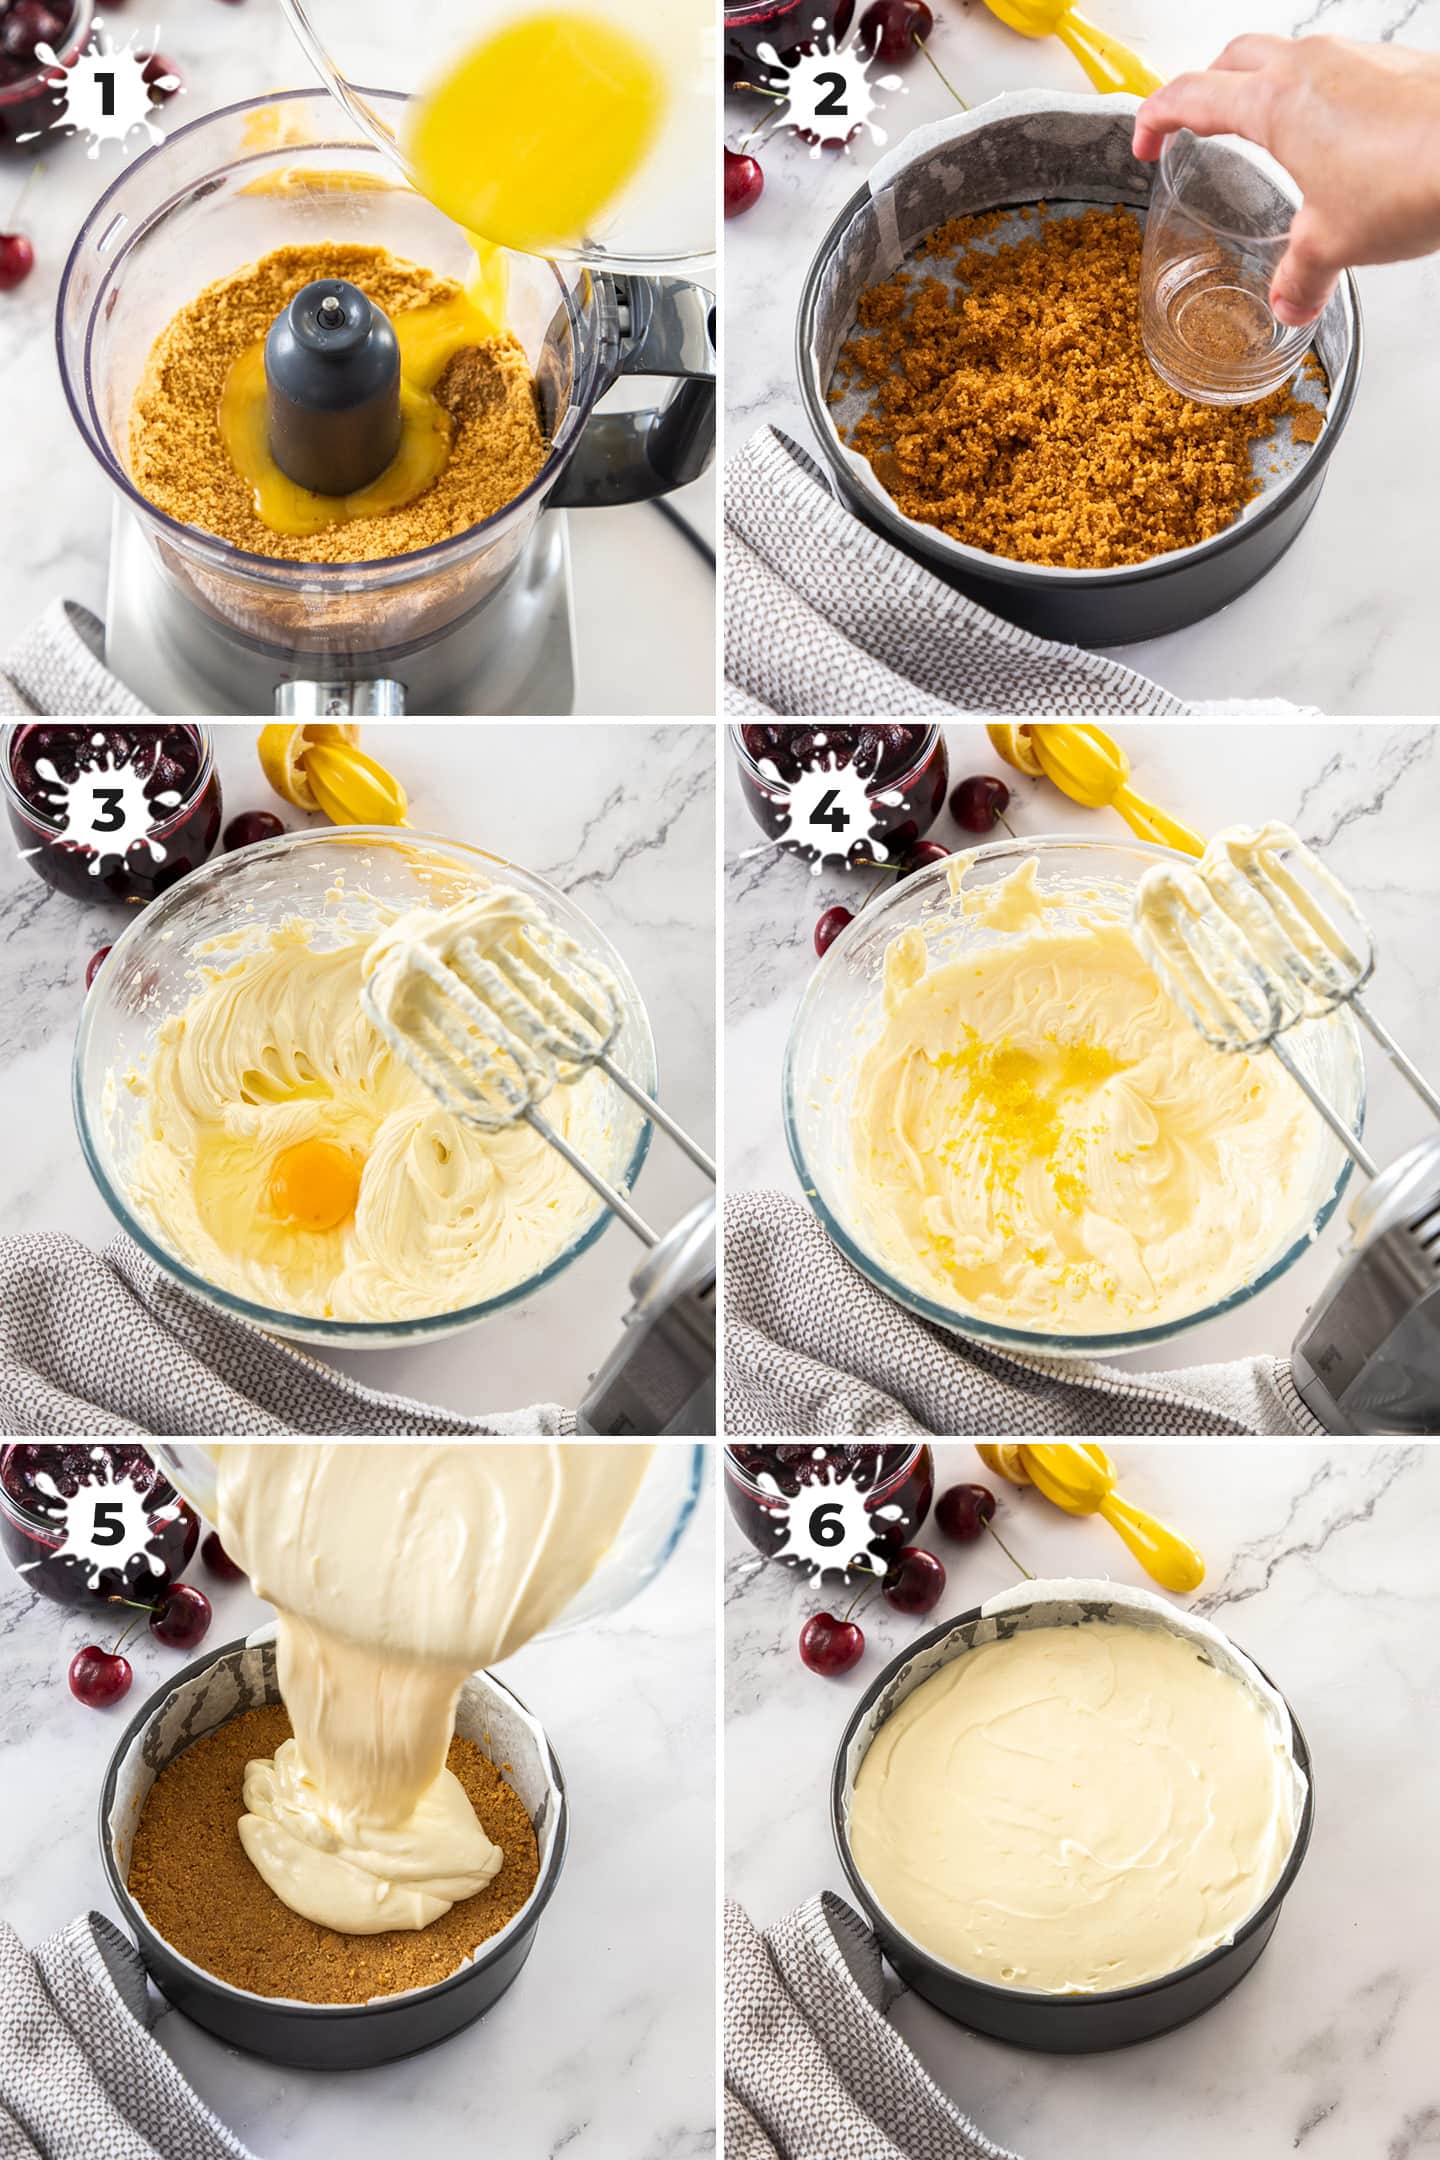 6 images showing the steps to making baked cheesecake.